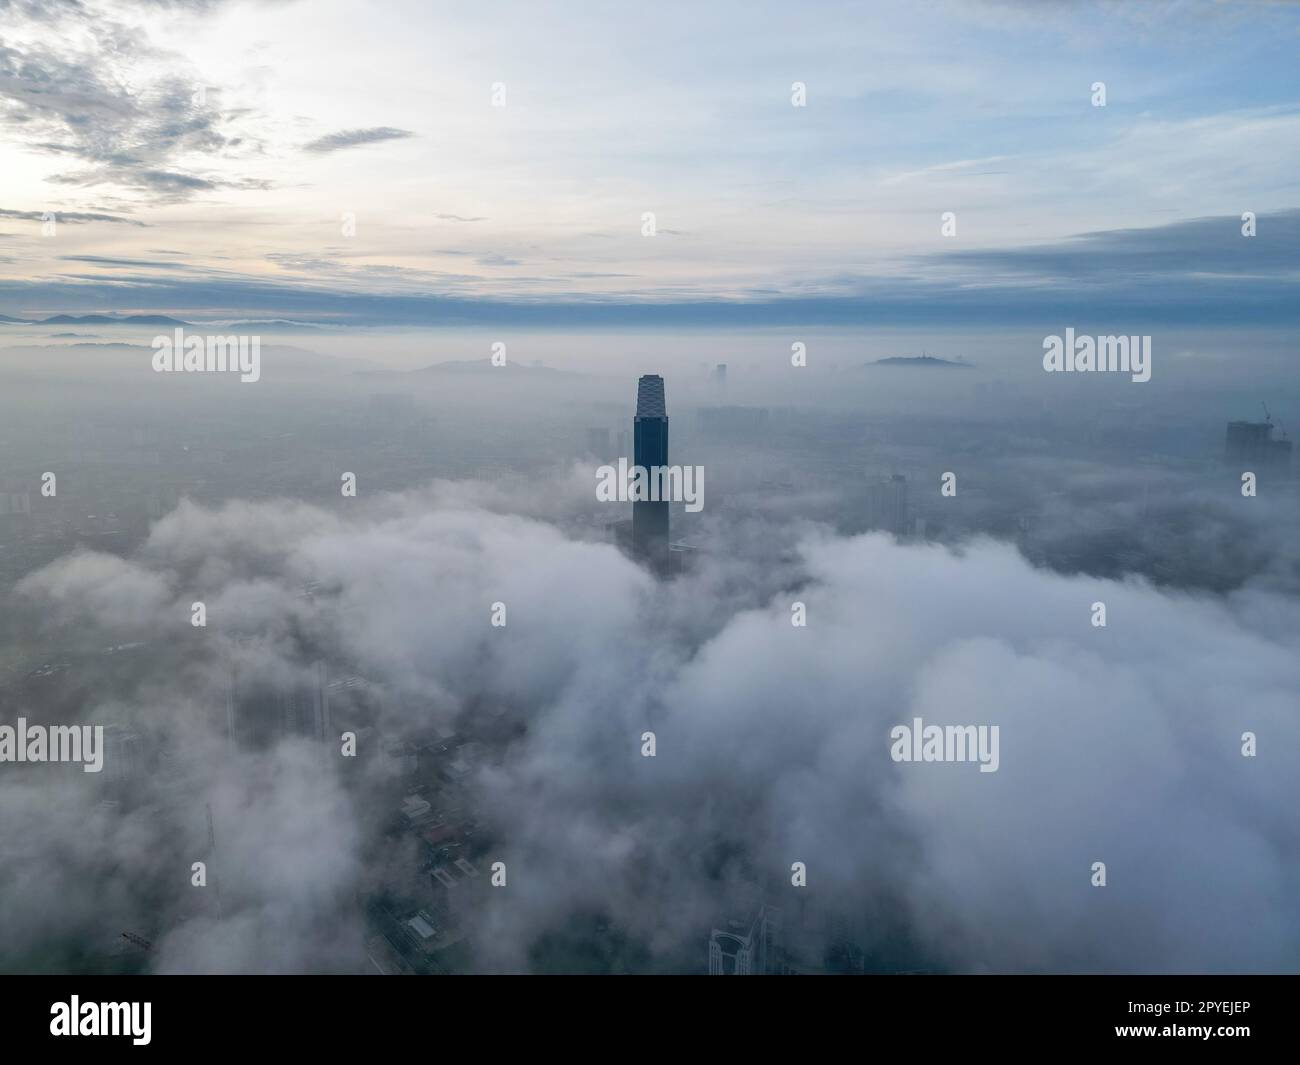 The low clouds provide a misty veil around the Exchange 106 Stock Photo